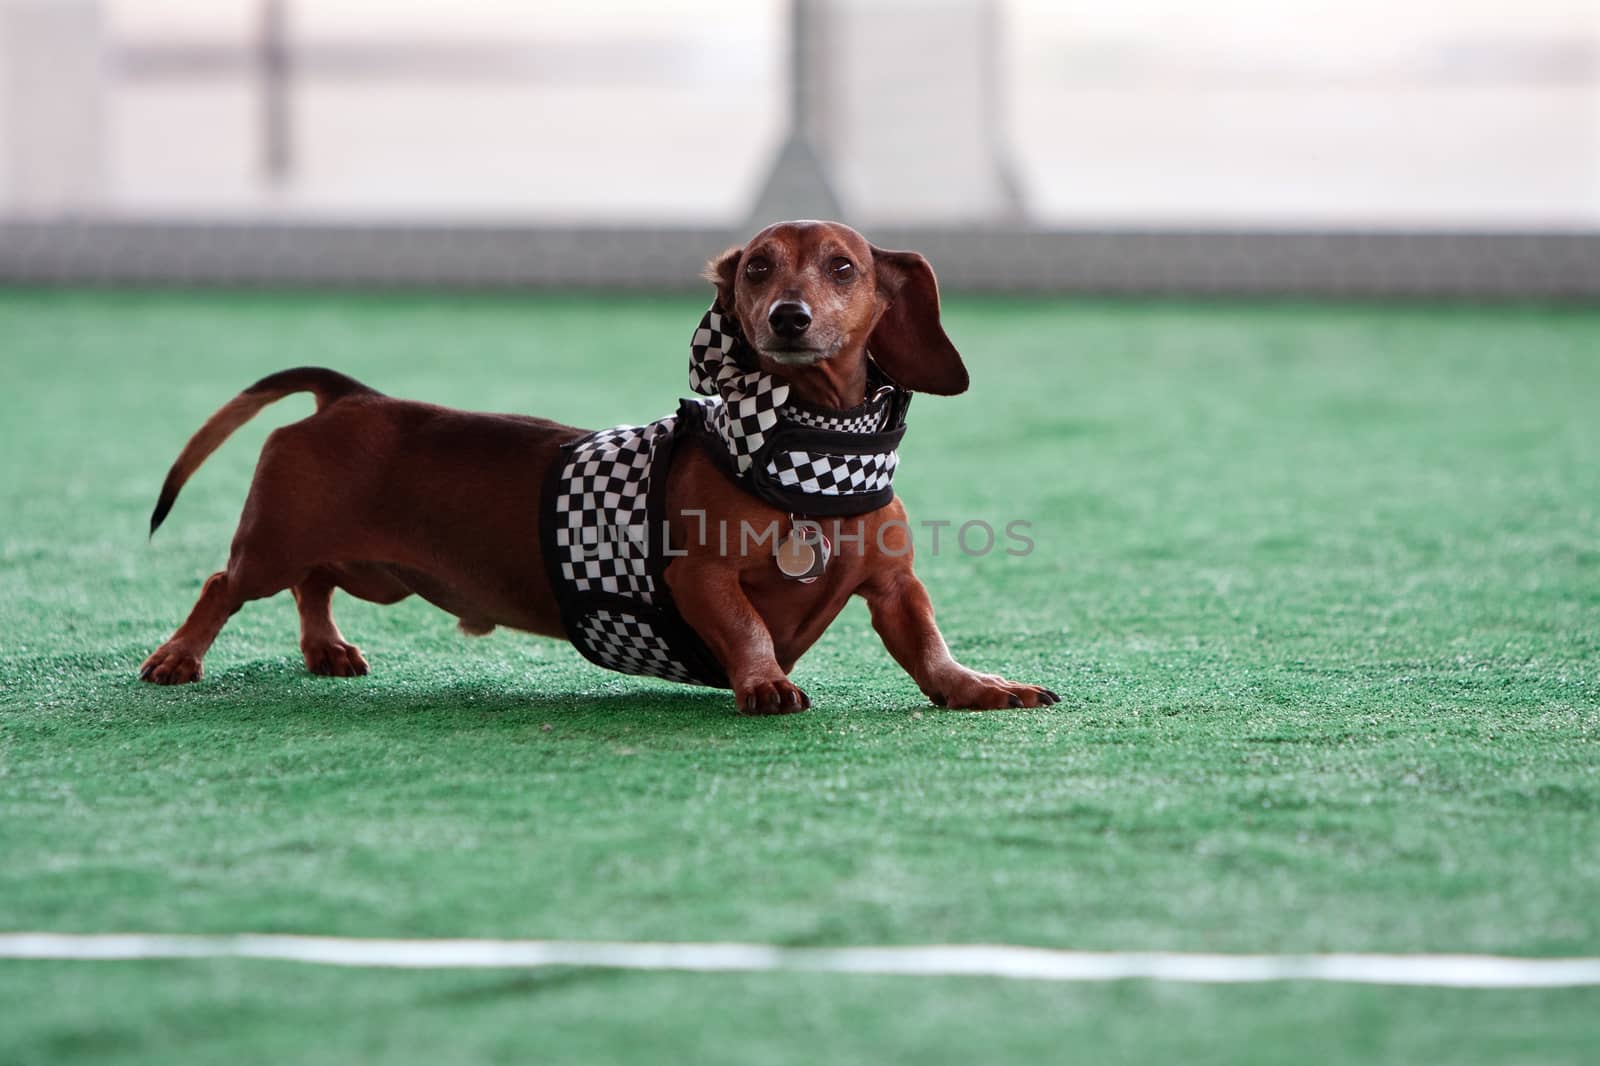 McDonough, GA, USA - May 10, 2014:  A dachshund dressed in a checkered flag costume gets ready to race at the annual Dog Days of McDonough festival.